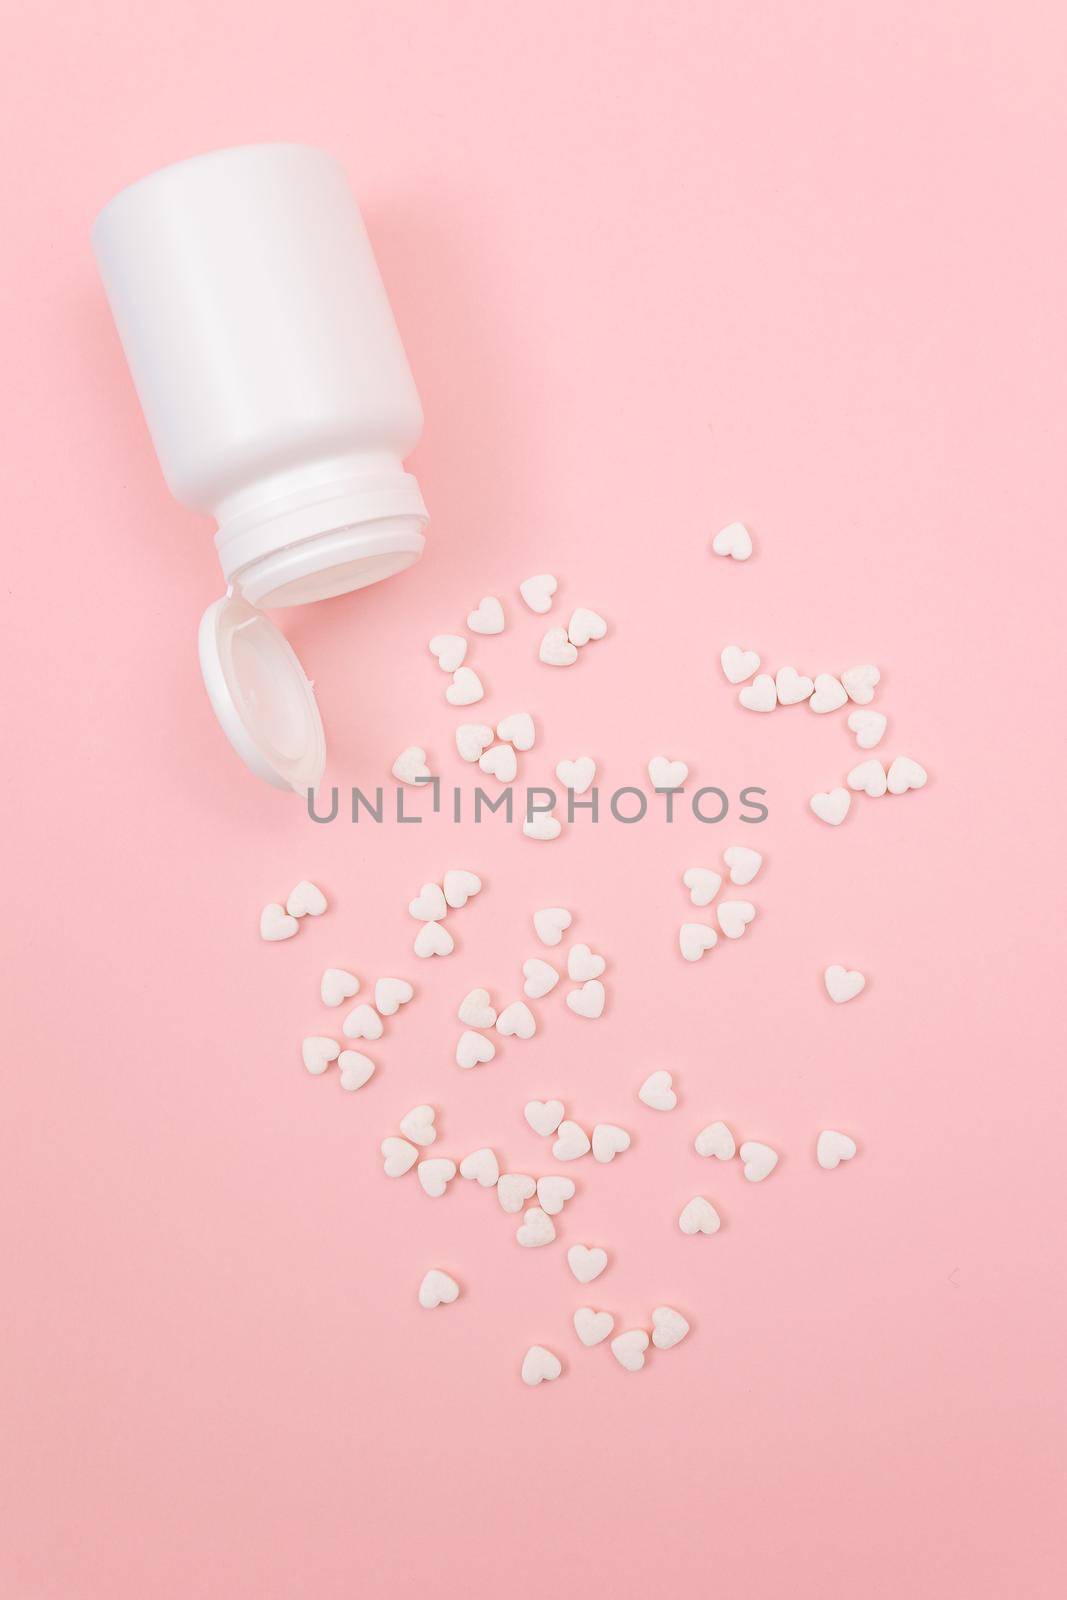 Global Pharmaceutical Industry and Medicinal Products - White Pills or Tablets Scattered from the Pill Container, Lying on Pink Background